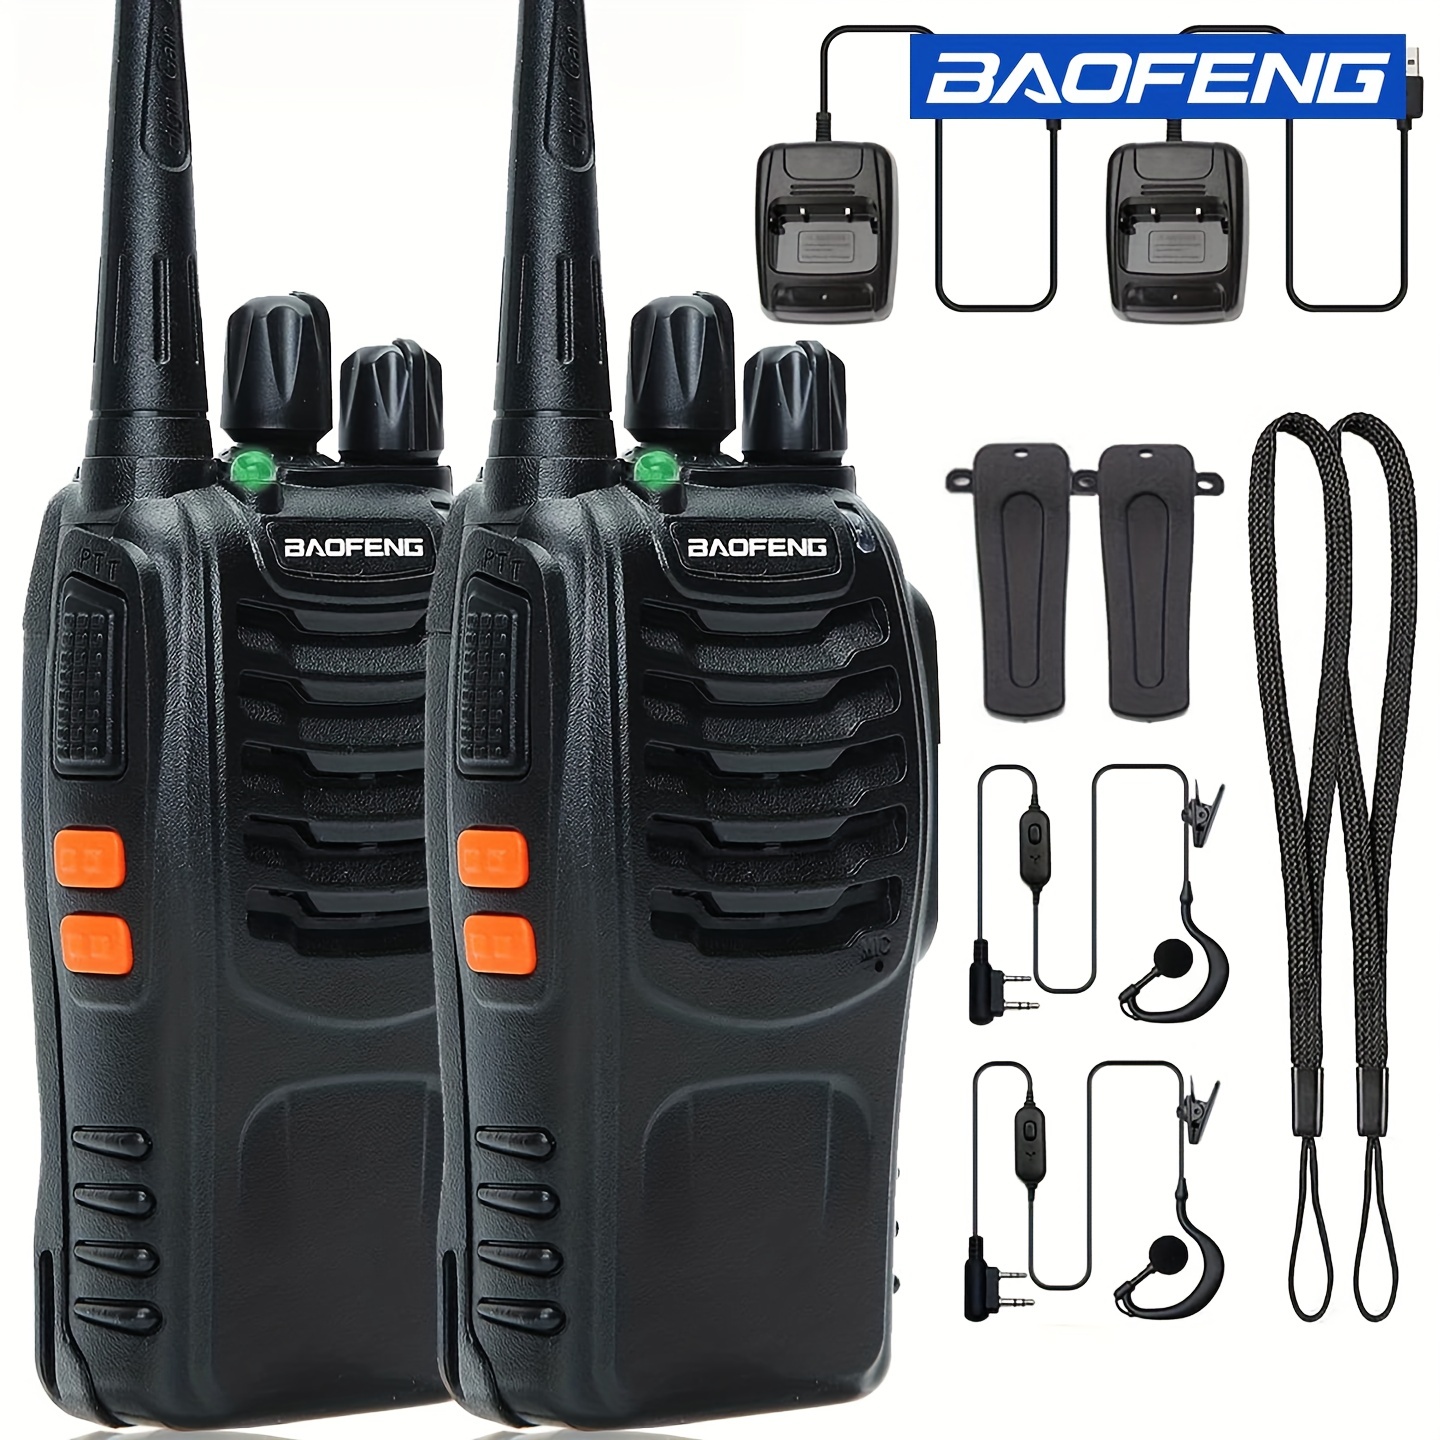 Case of 6,Retevis H-777 Walkie Talkies for Adults Long Range, Rechargeable Two-Way Radios,with 6-Way Multi Unit Charger,Flashlight Handheld Business - 2